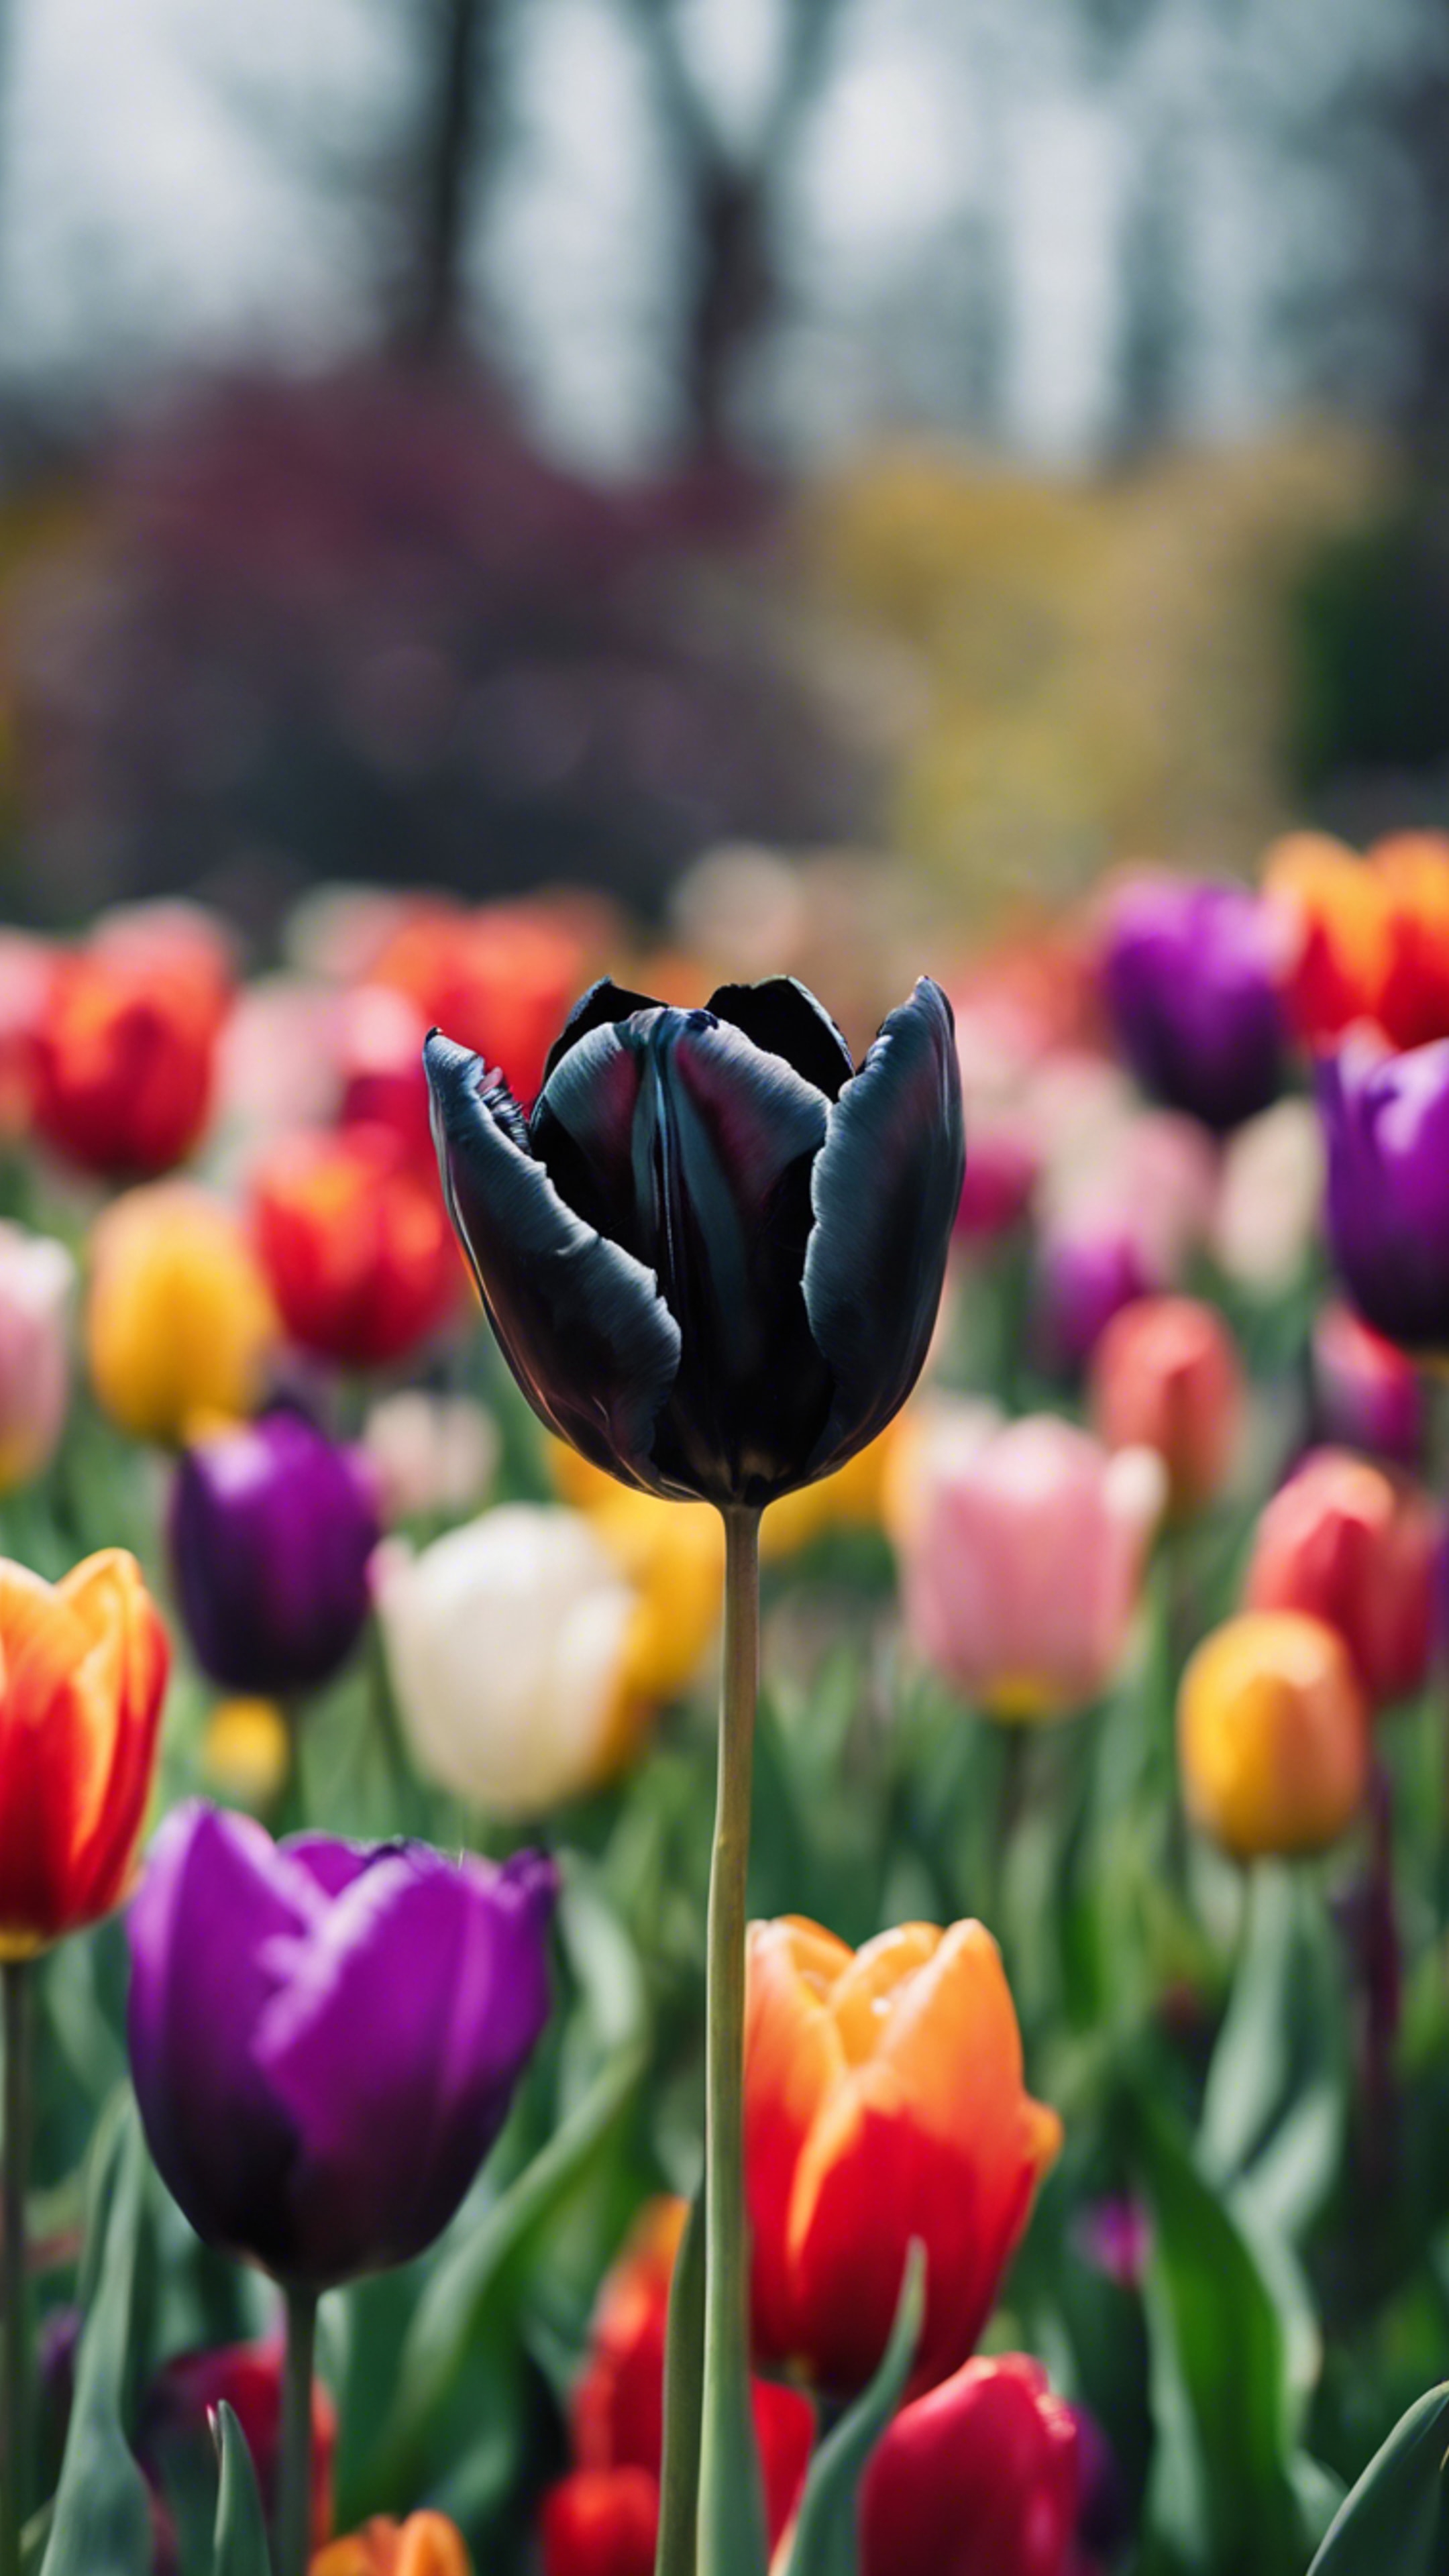 A delicate black tulip, standing out dramatically among a vibrant spray of multicolored tulips in a spring garden. Tapeta[60dfa6a8a46243228945]